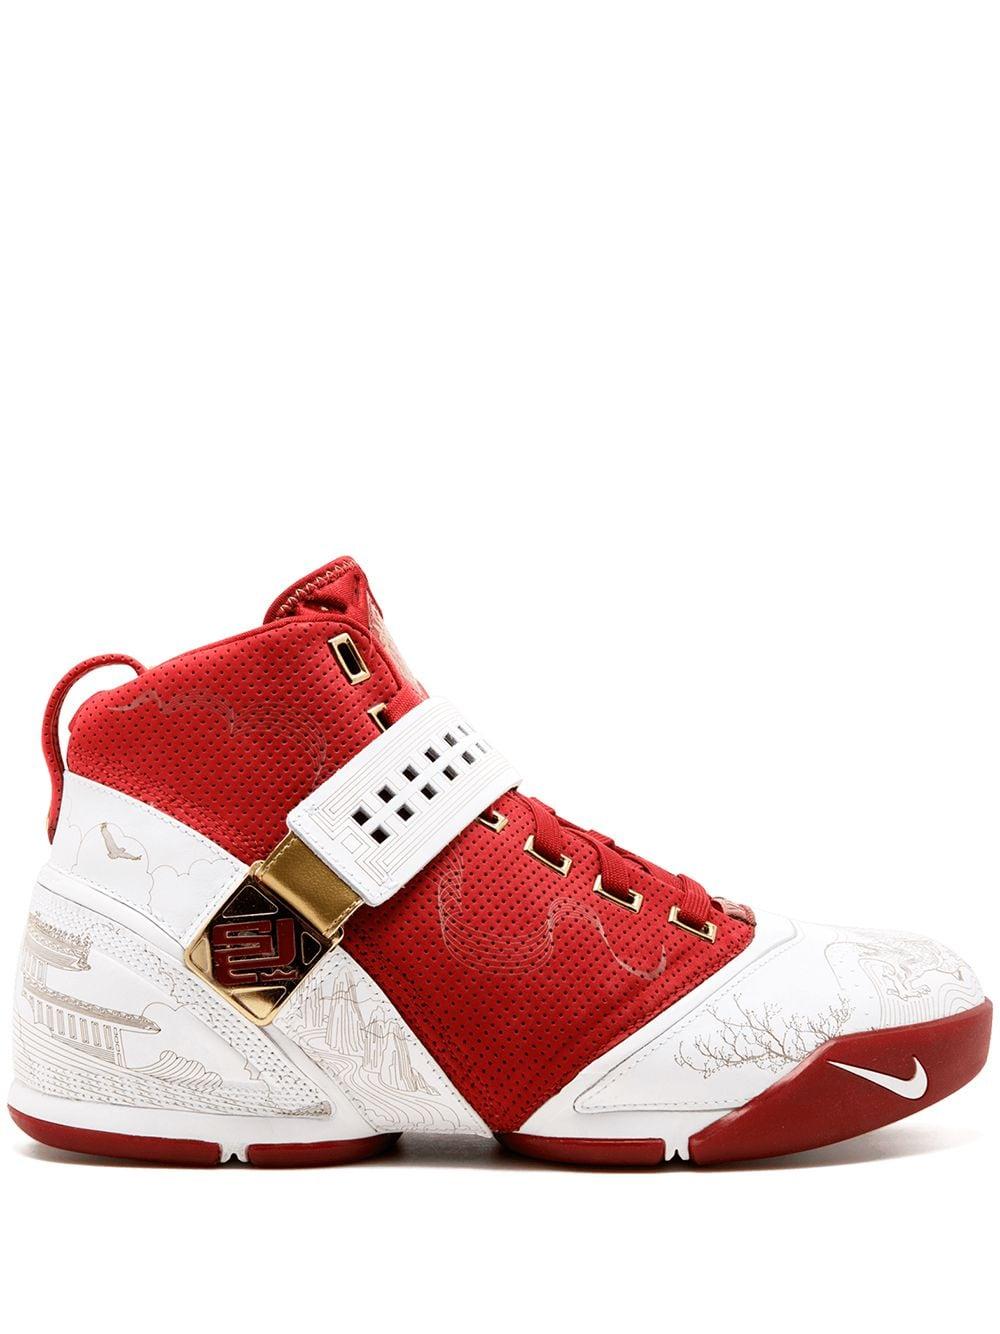 Nike Leather Zoom Lebron 5 Sneakers in Red for Men - Lyst